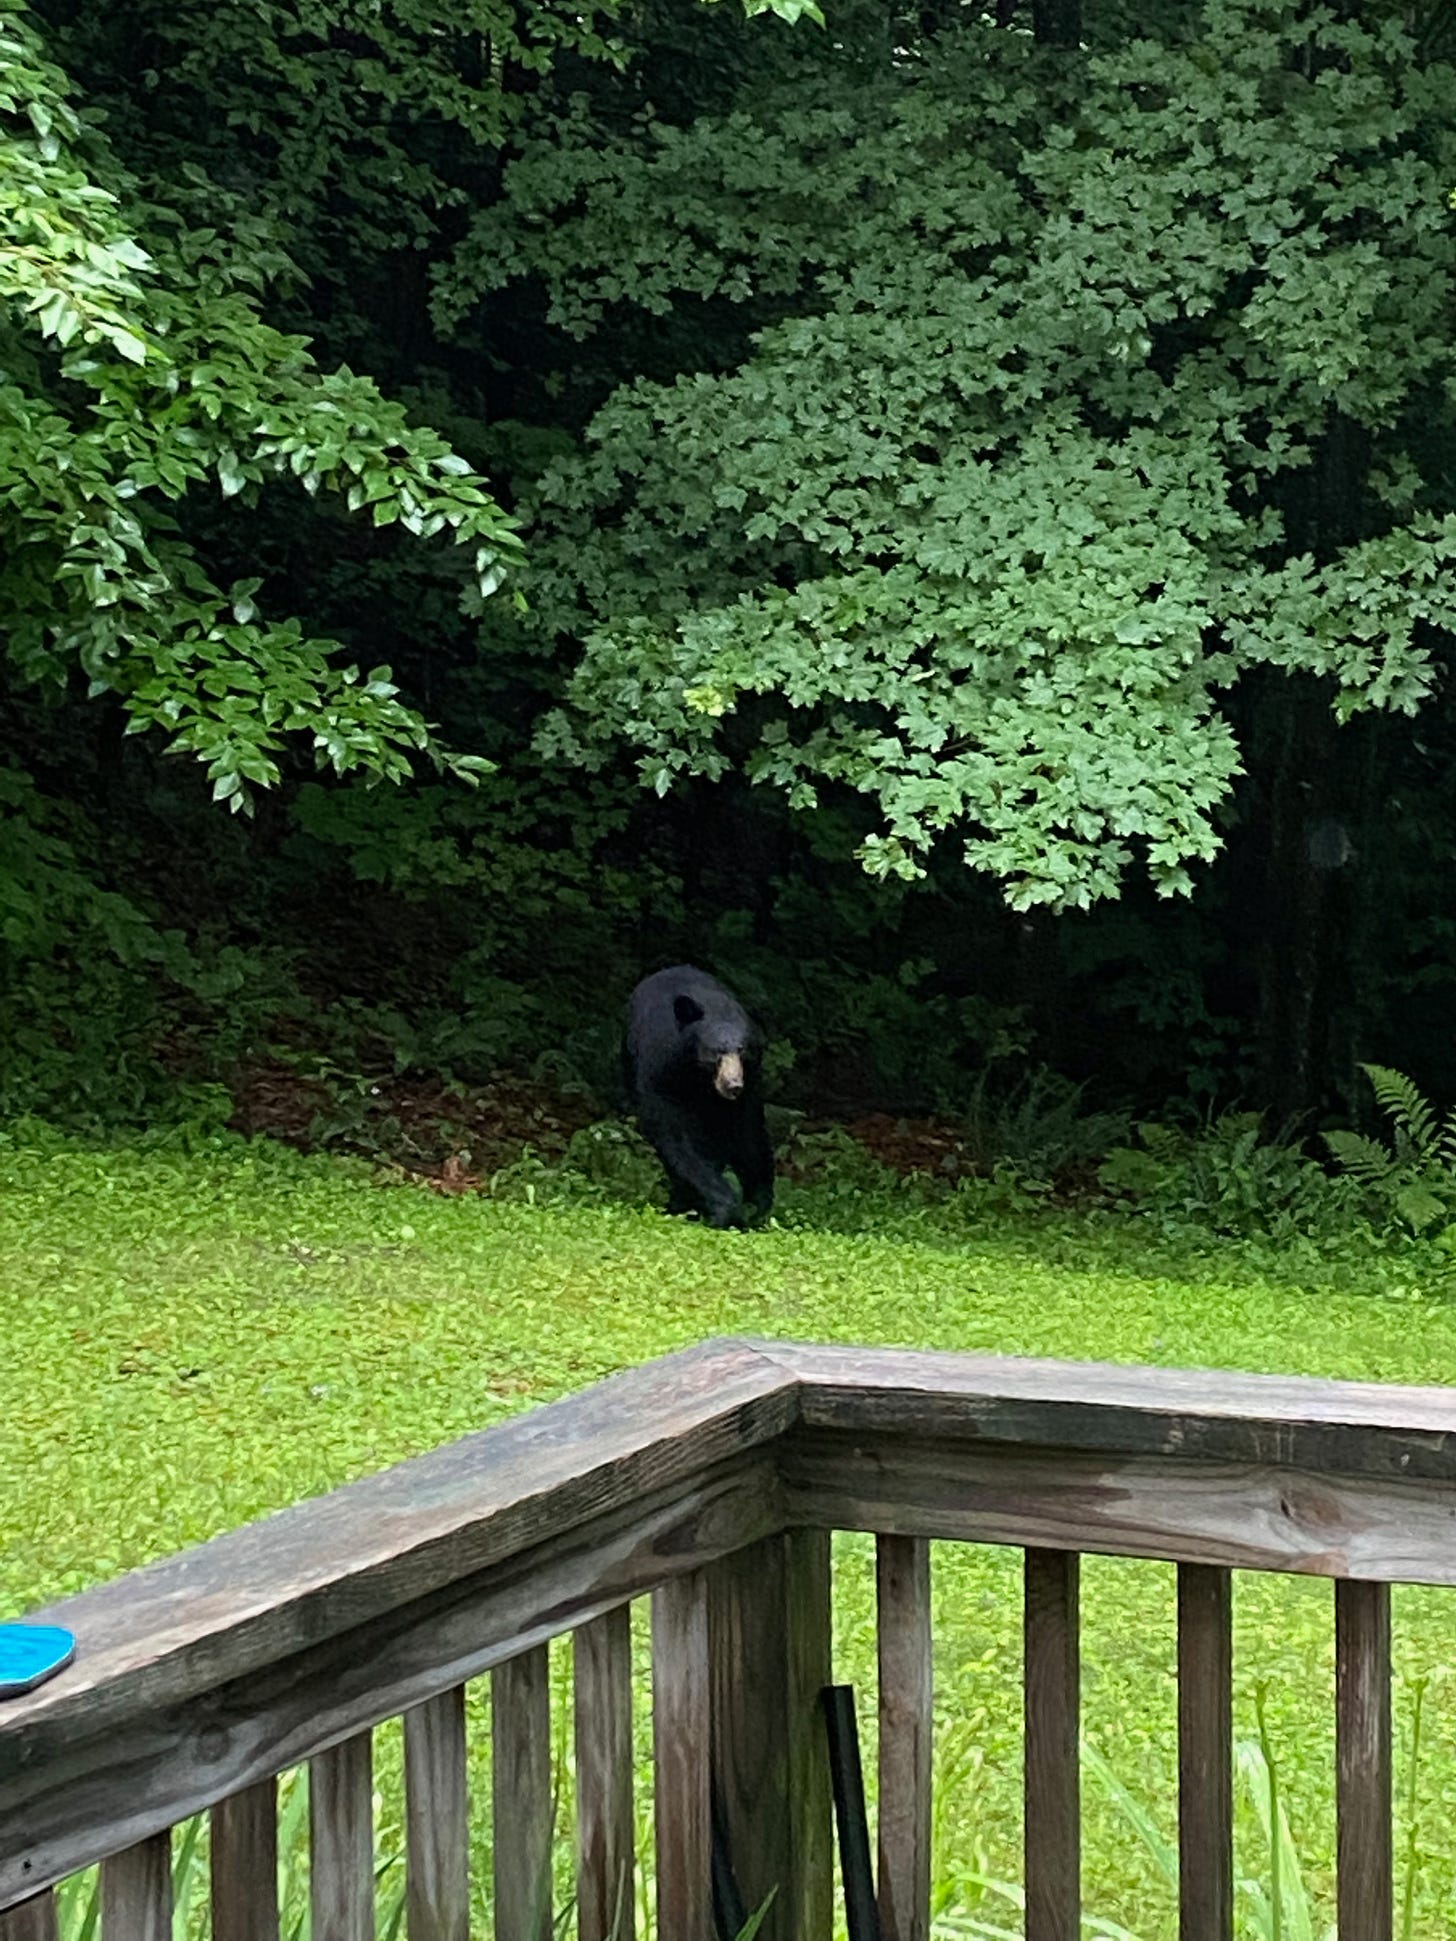 A black bear standing on all fours at the edge of a lawn, looking right at the camera. There is a porch railing in the foreground.